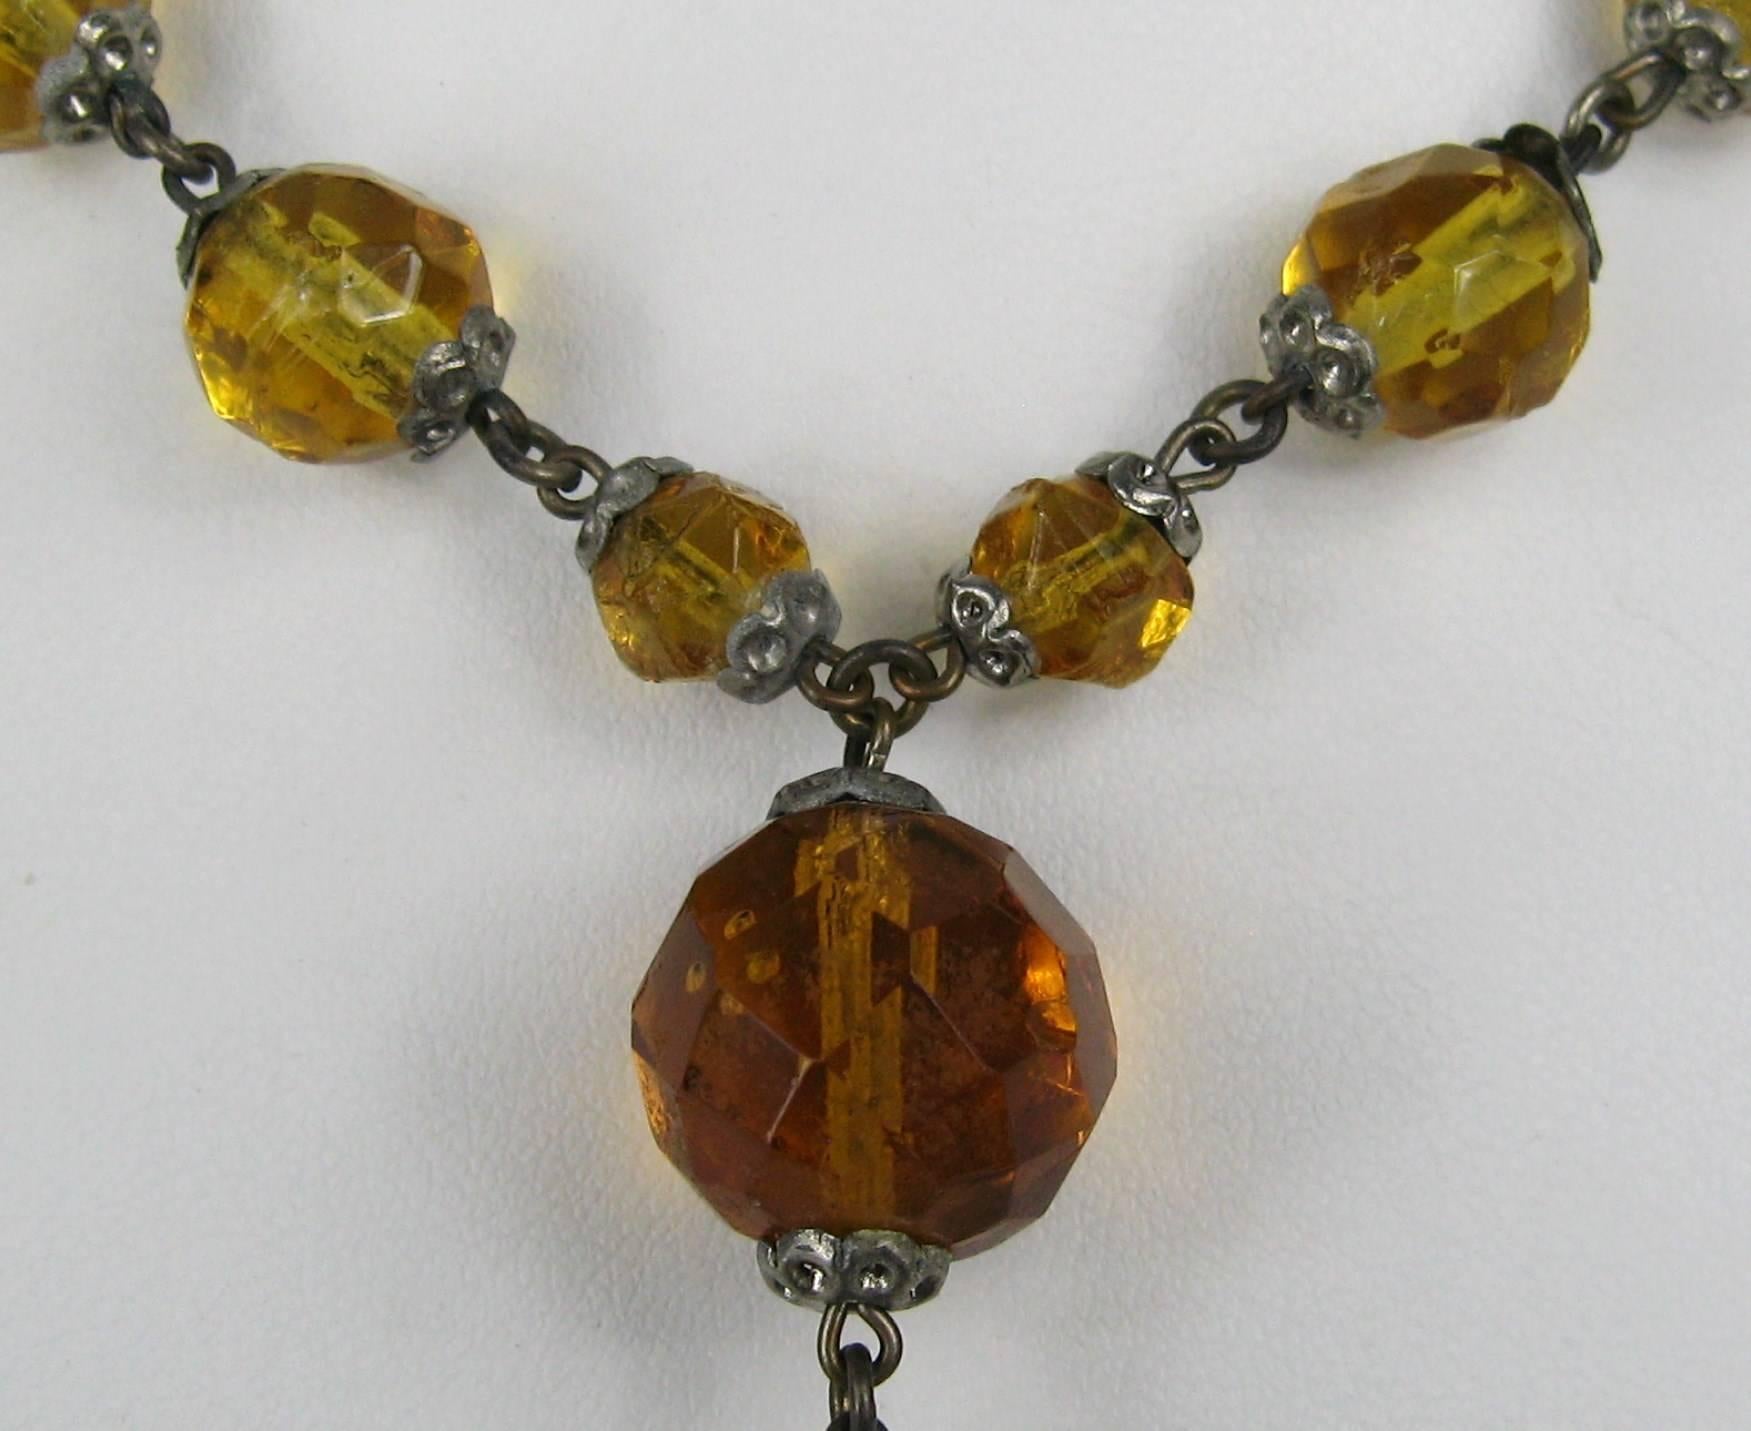 Amber Glass Beads Flapper necklace Ca. 1920s. Beading  measures approx. 7mm - 9.8 mm-12mm-14.50mm. The drop beads measures 28.85mm x 11.80. Length is 29 inches to the drop, then 37 inches. This is out of our massive collection of Hopi, Zuni, Navajo,